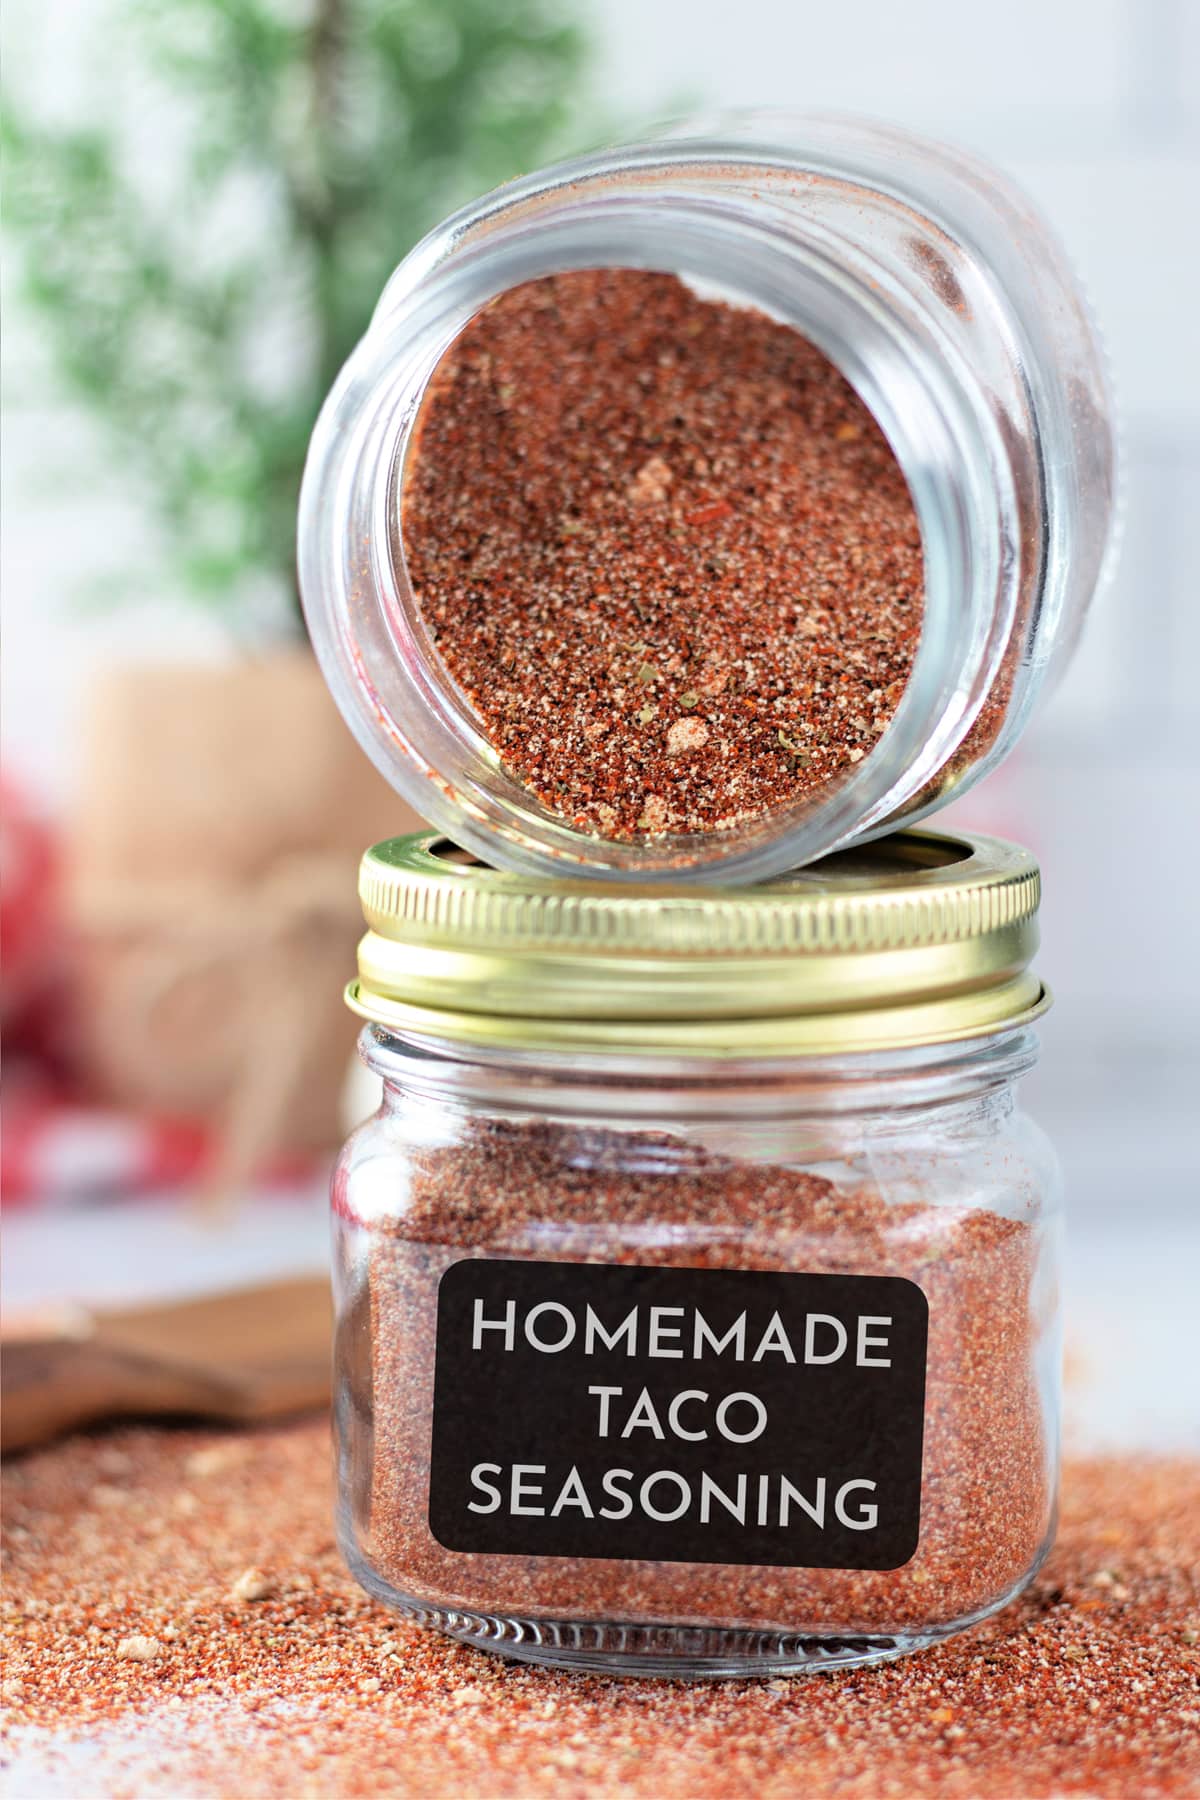 A jar of taco seasoning on its side over a second jar